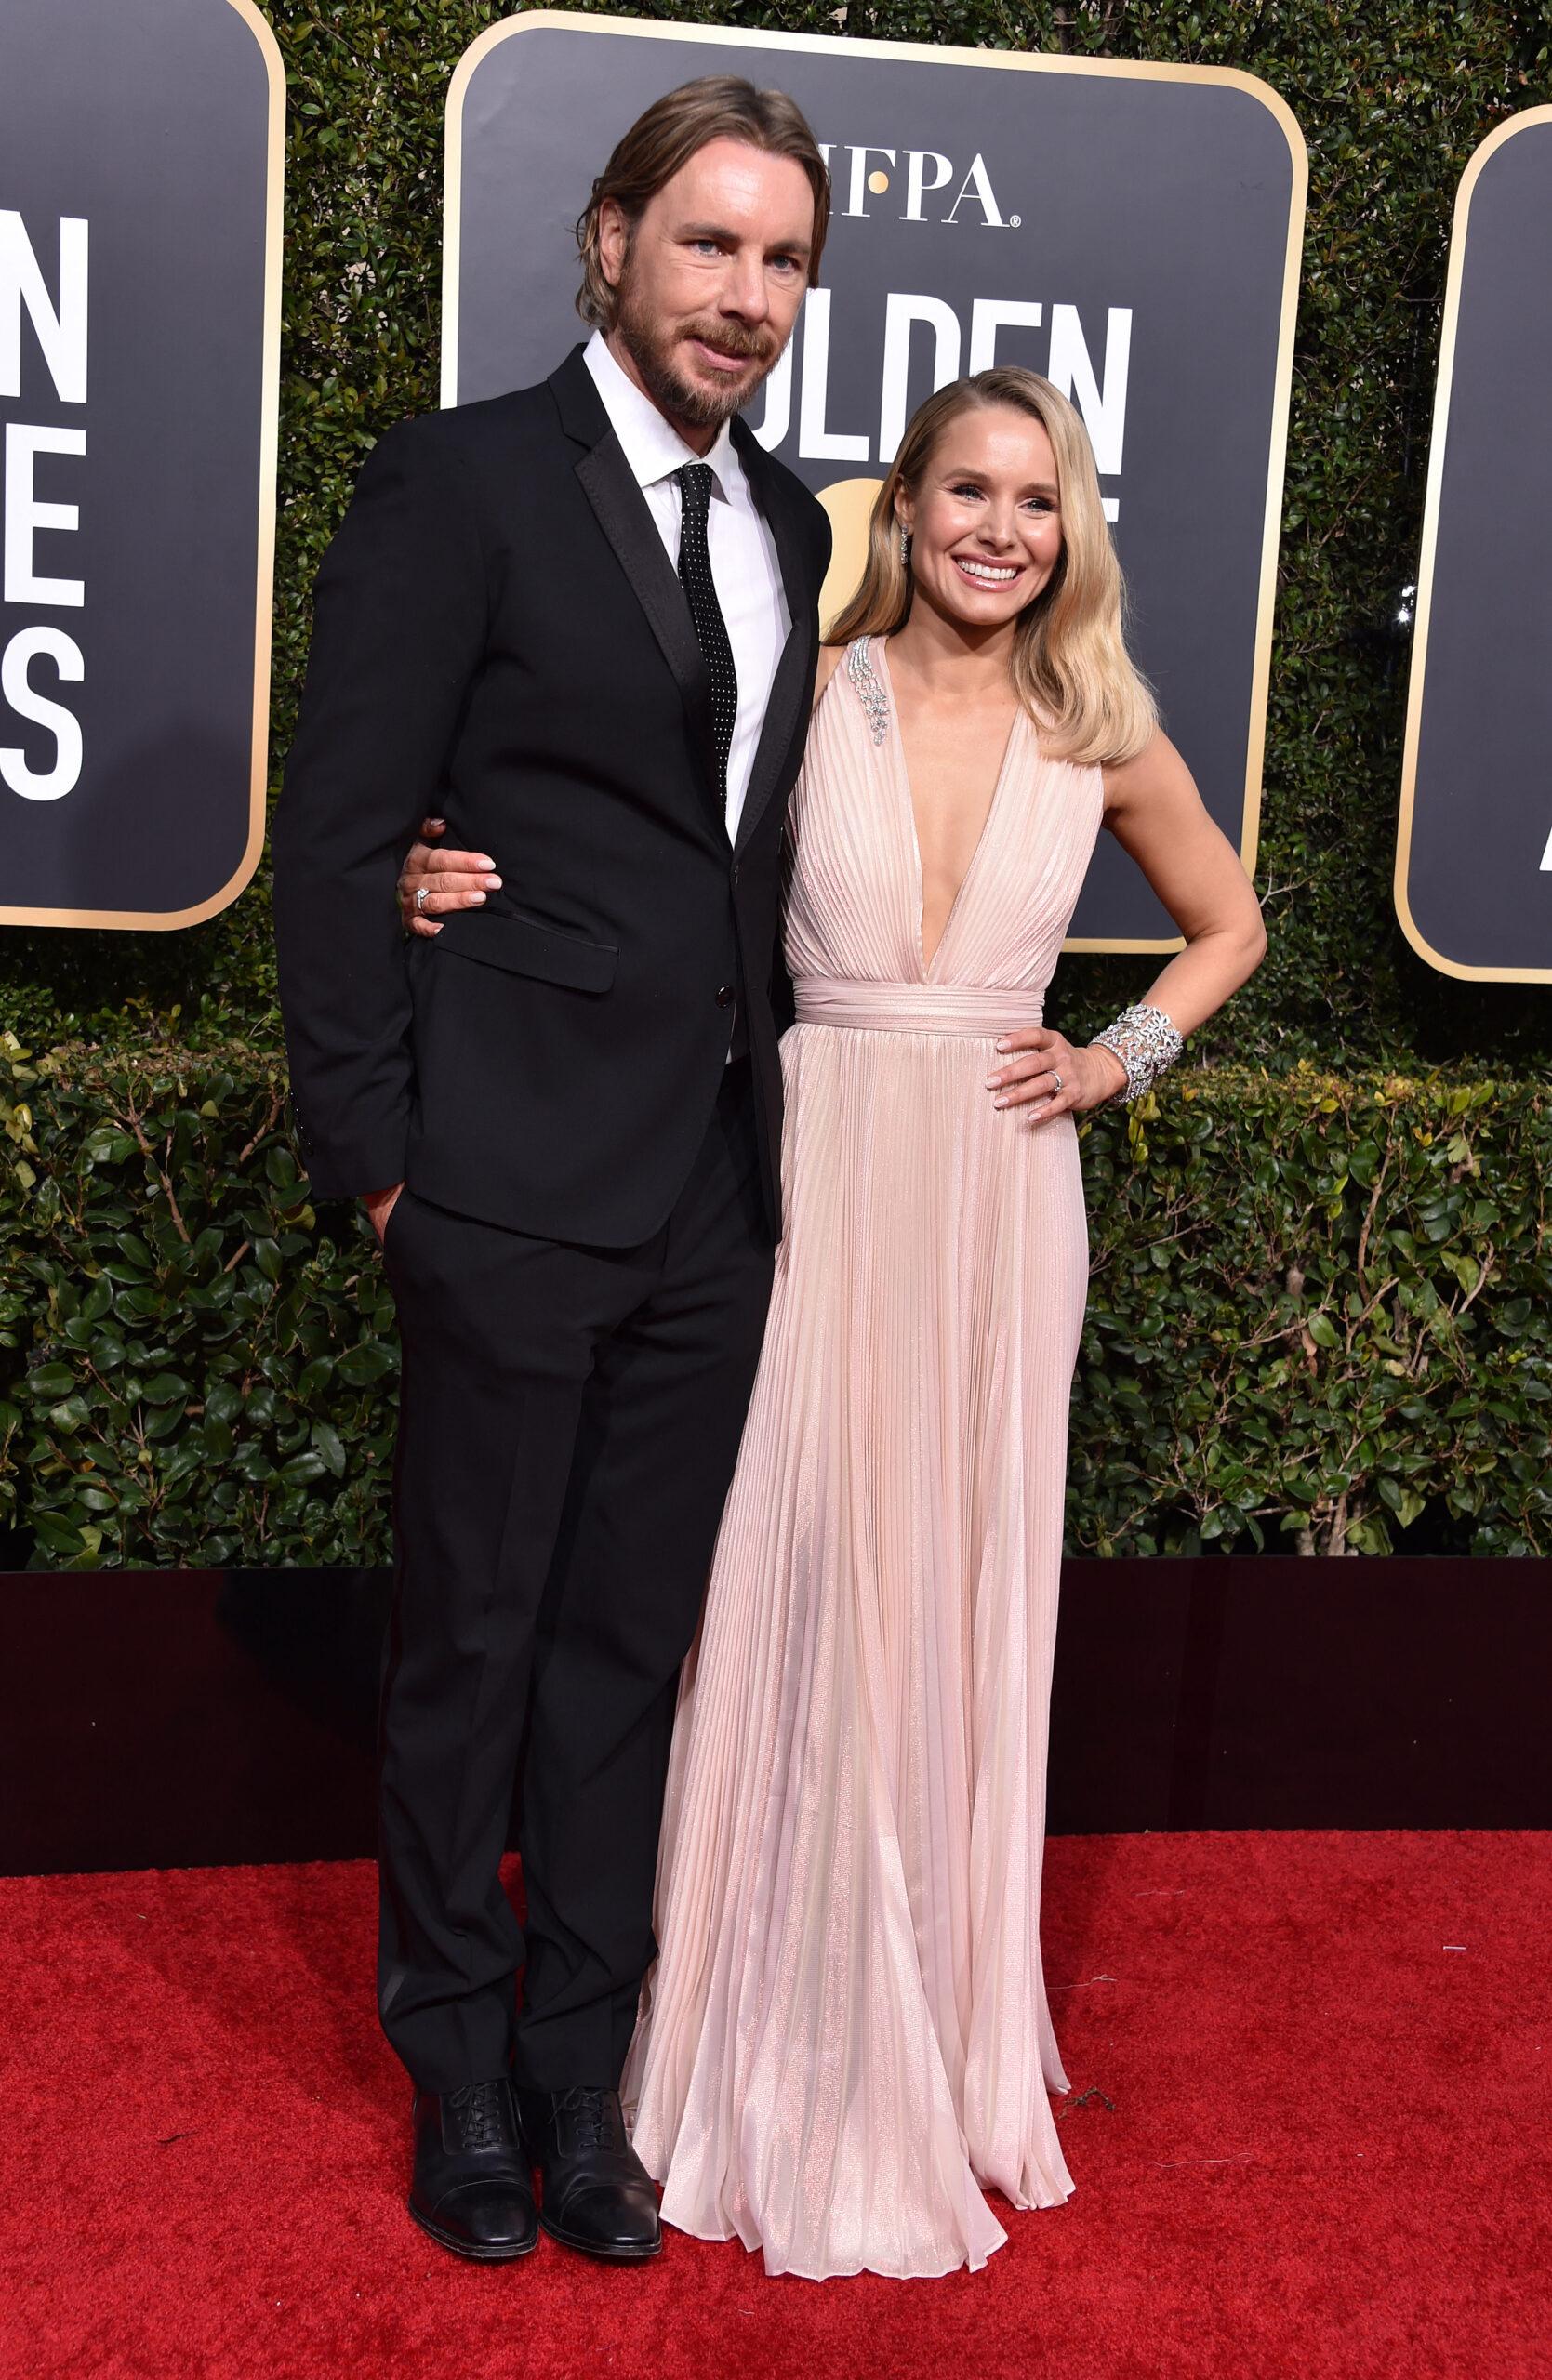 Dax Shepard and Kristen Bell at the 75th Annual Golden Globe Awards - Arrivals